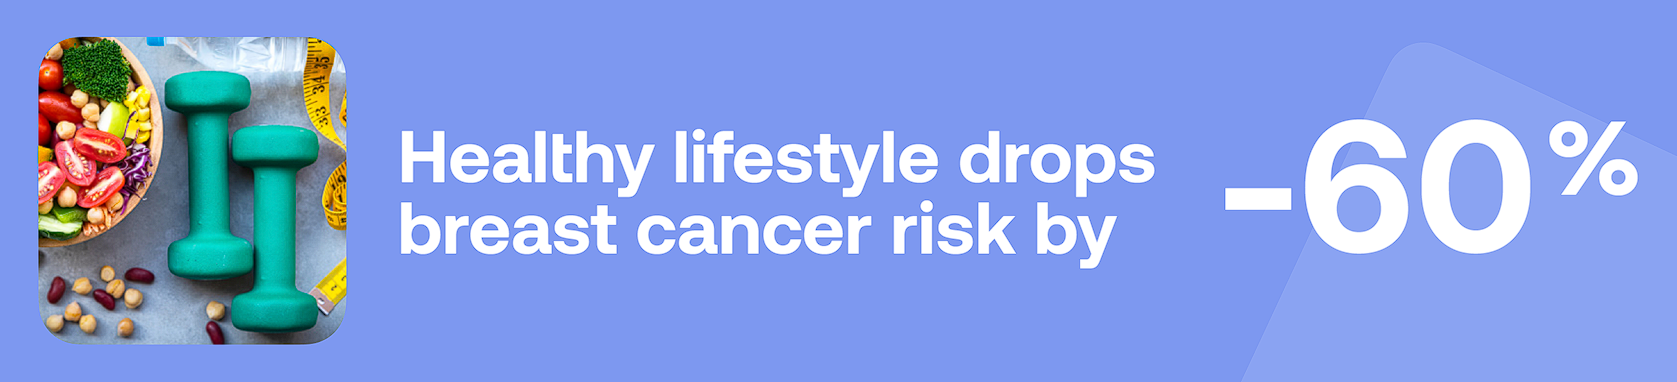 Healthy lifestyle drops breast cancer risk by -60%